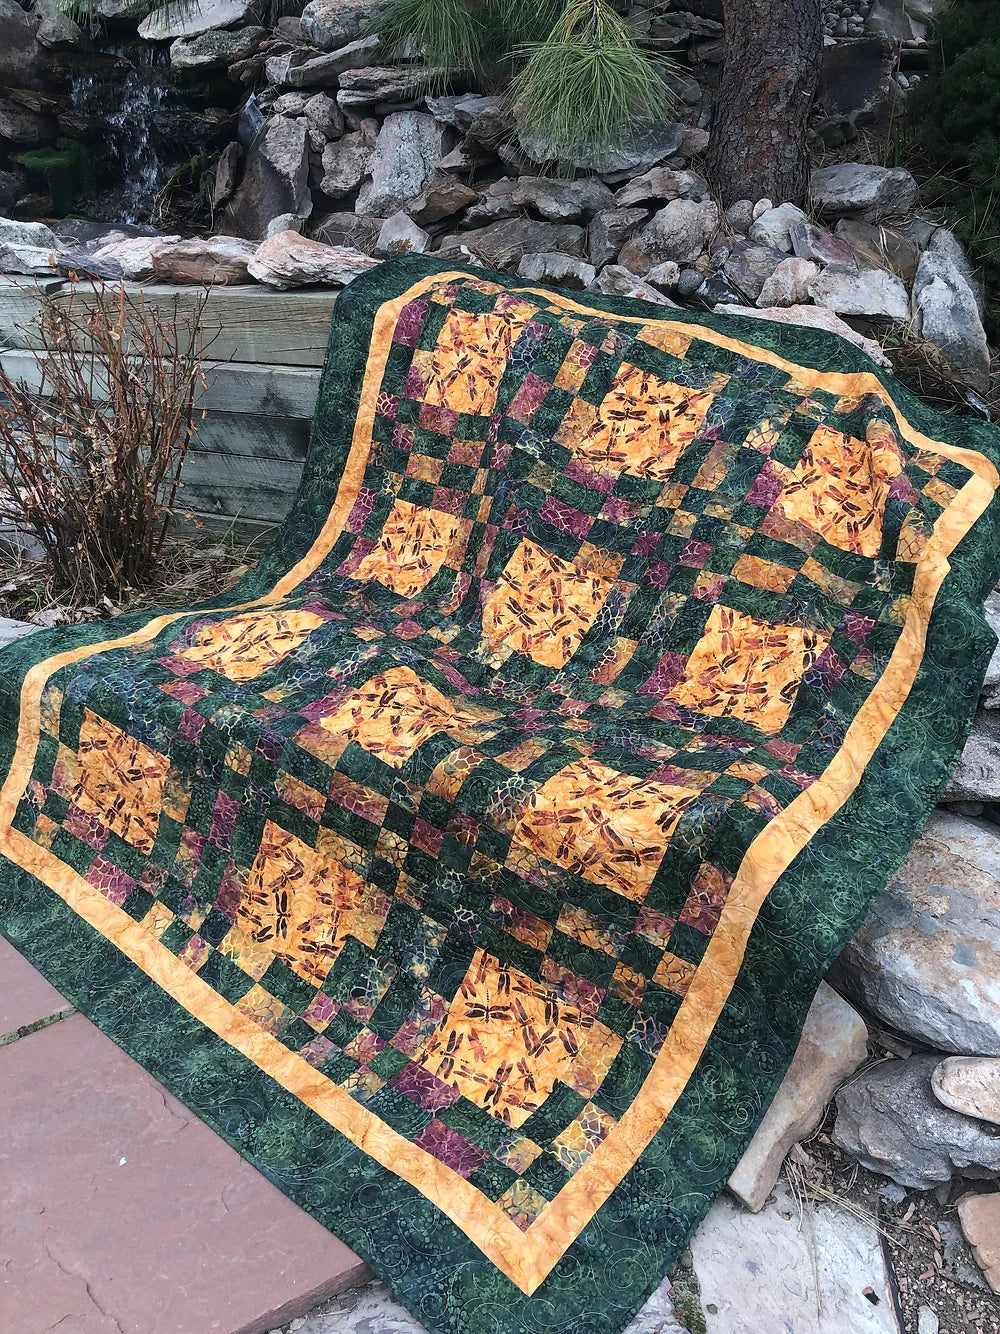 Four Square Quilt Pattern by Quilting Renditions